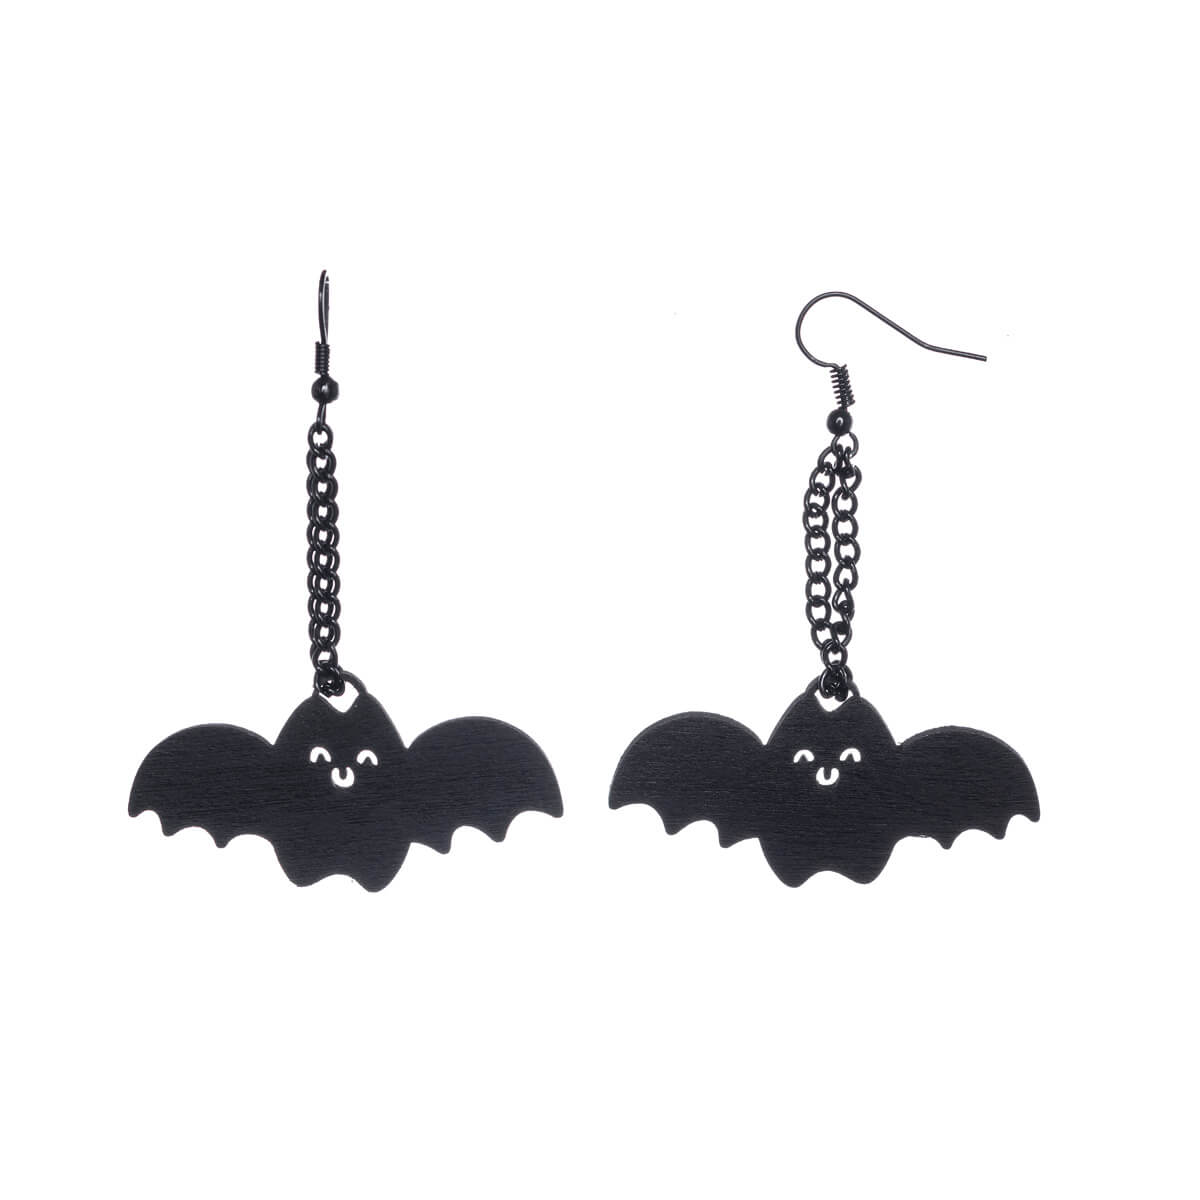 Wooden bat earrings on a chain - Made in Finland